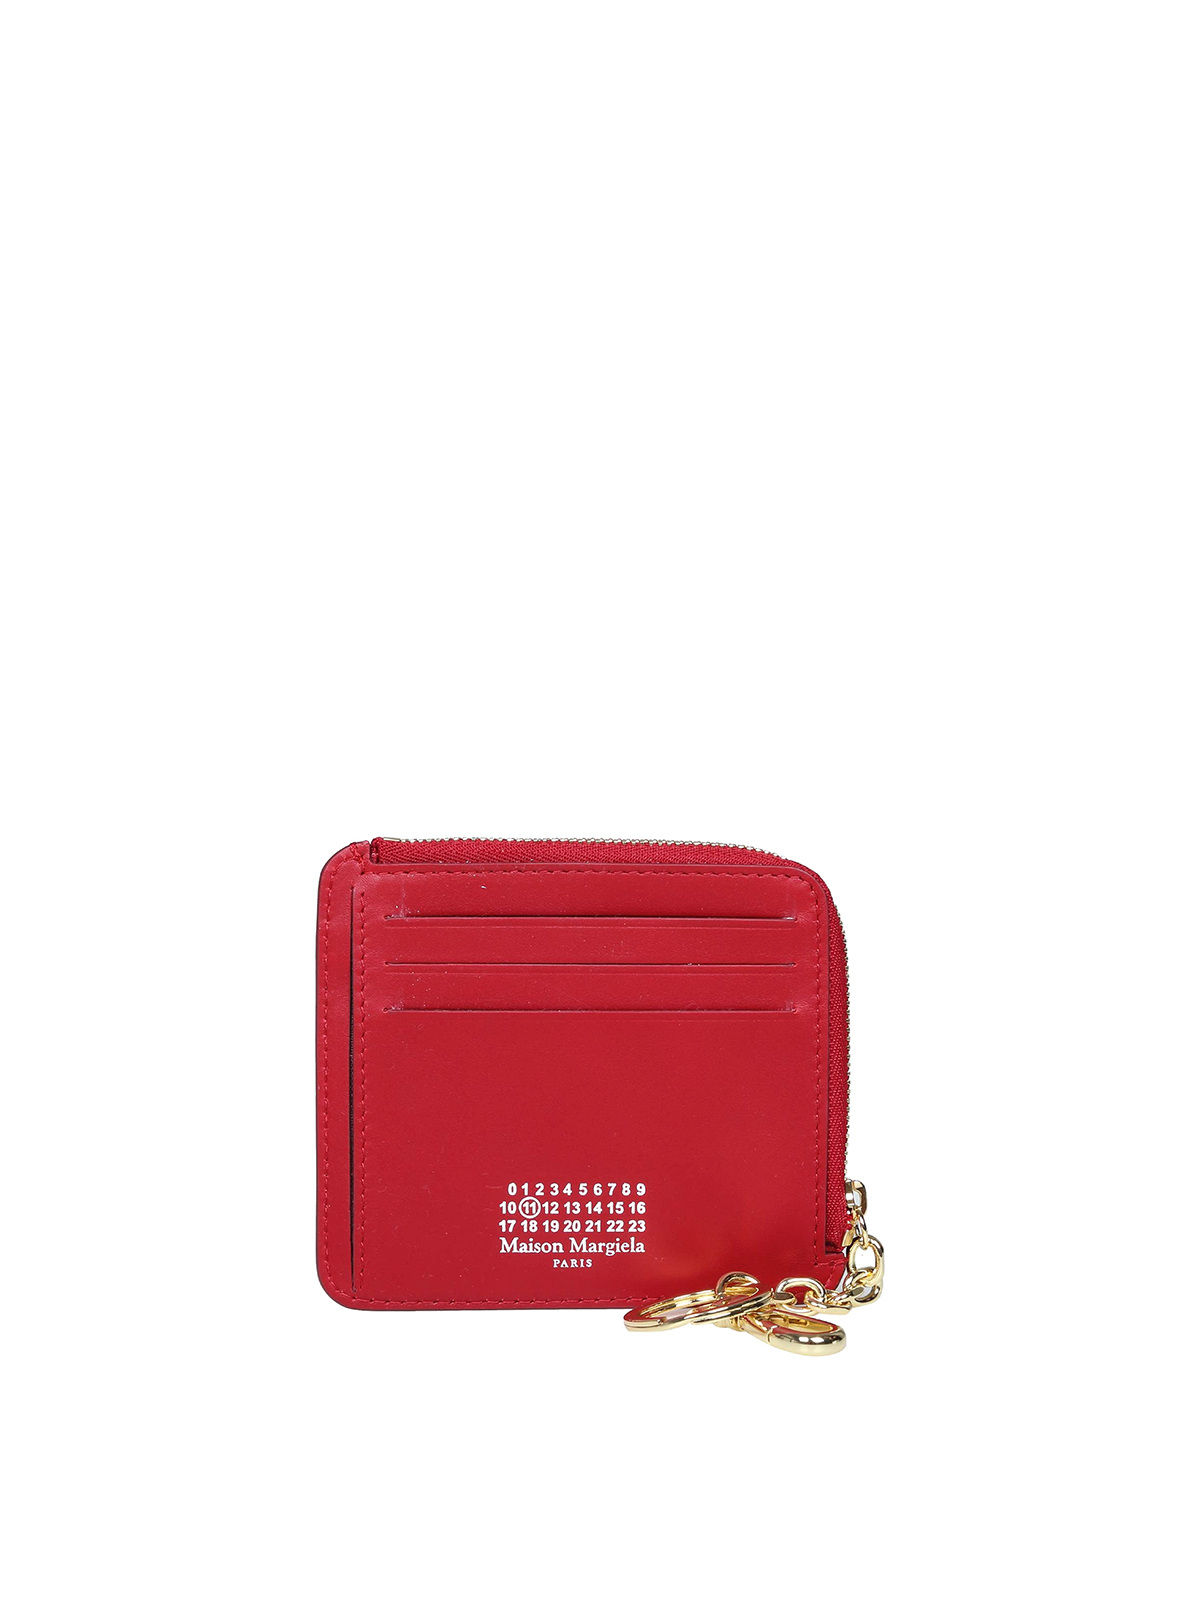 Maison Margiela Wallet With Red Key Ring